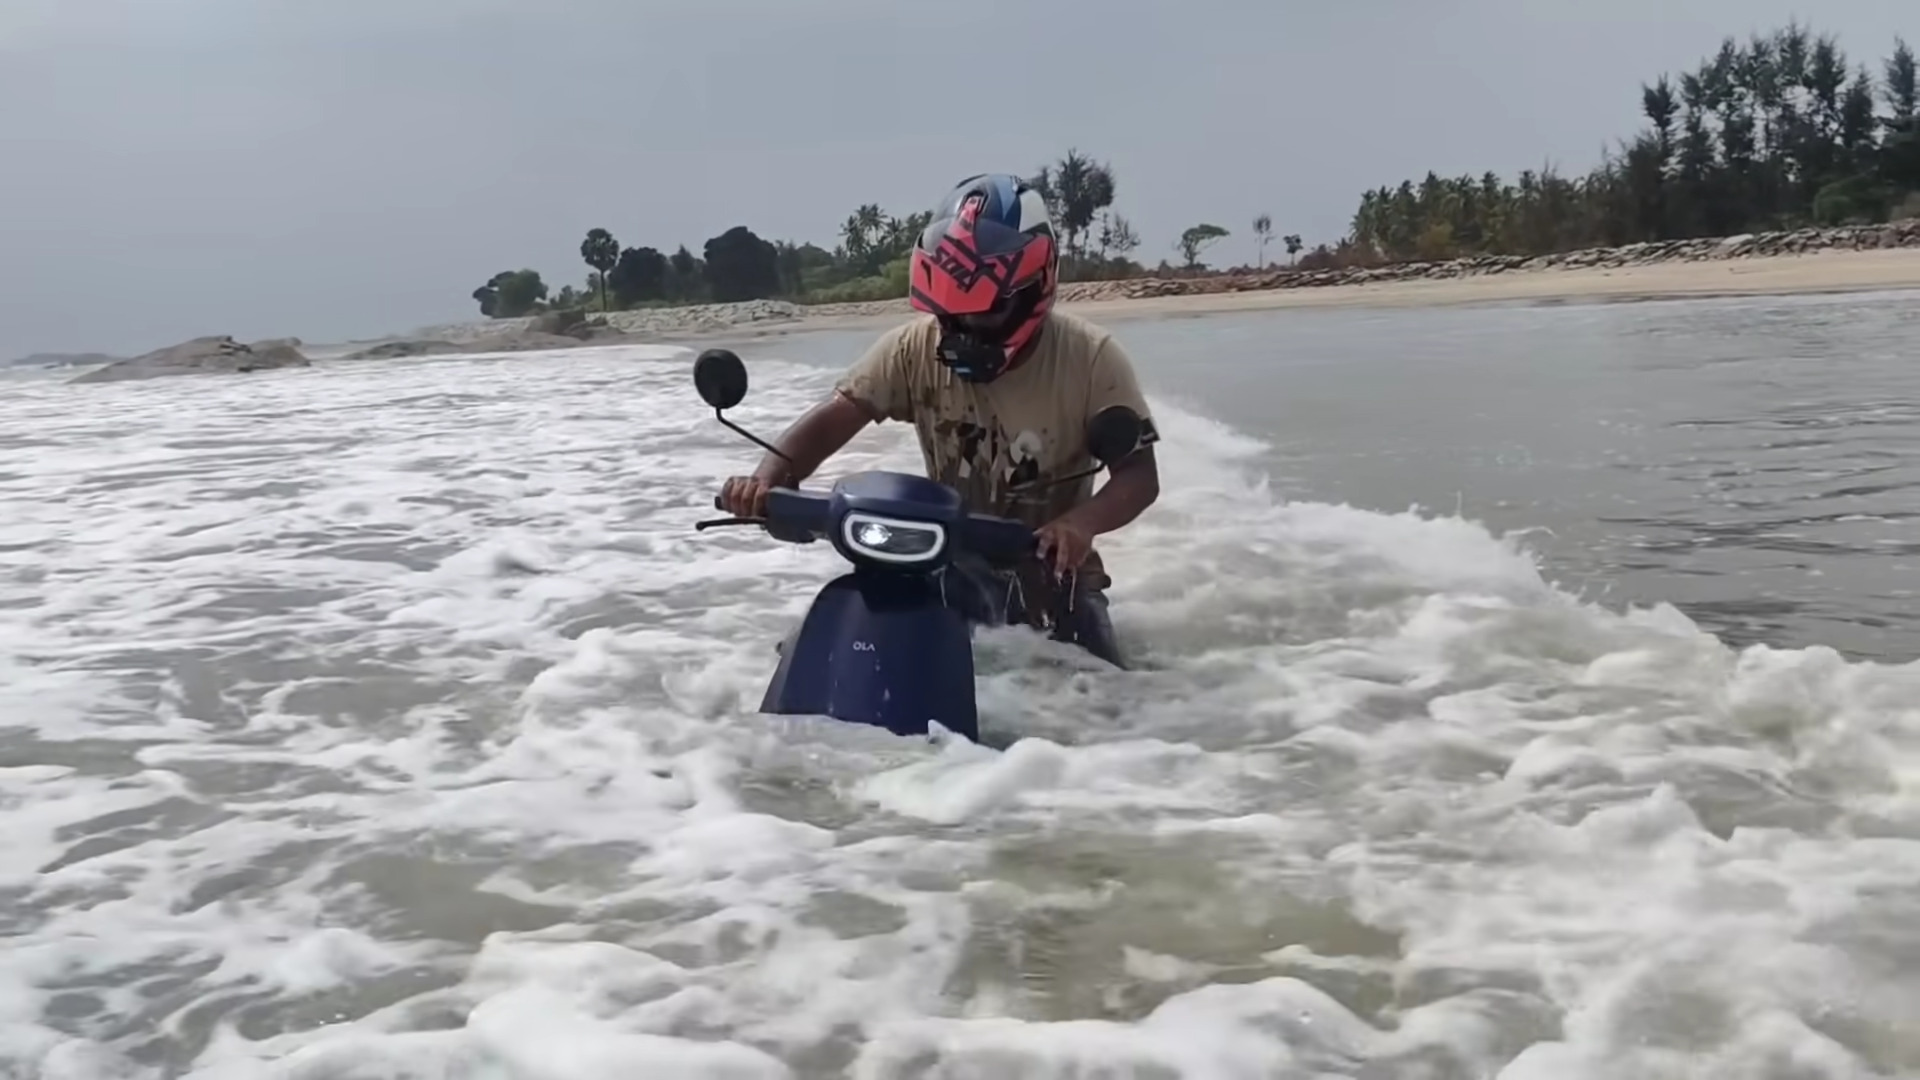 Ola Electric Scooter vs Sea Salt Water - Live Photos and Details - picture